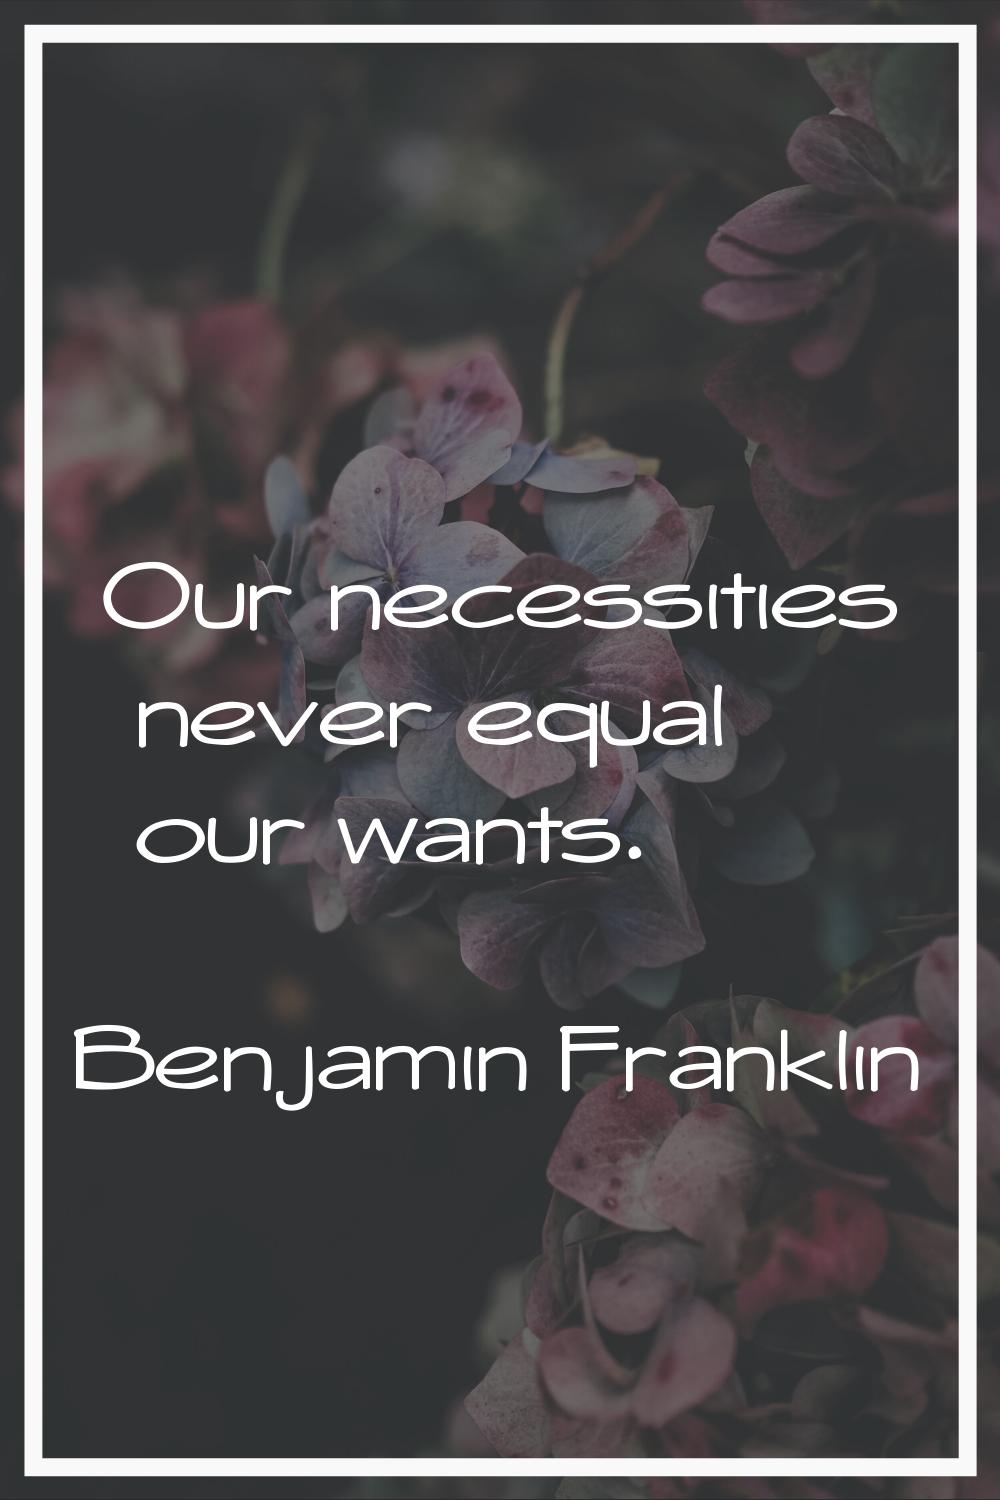 Our necessities never equal our wants.